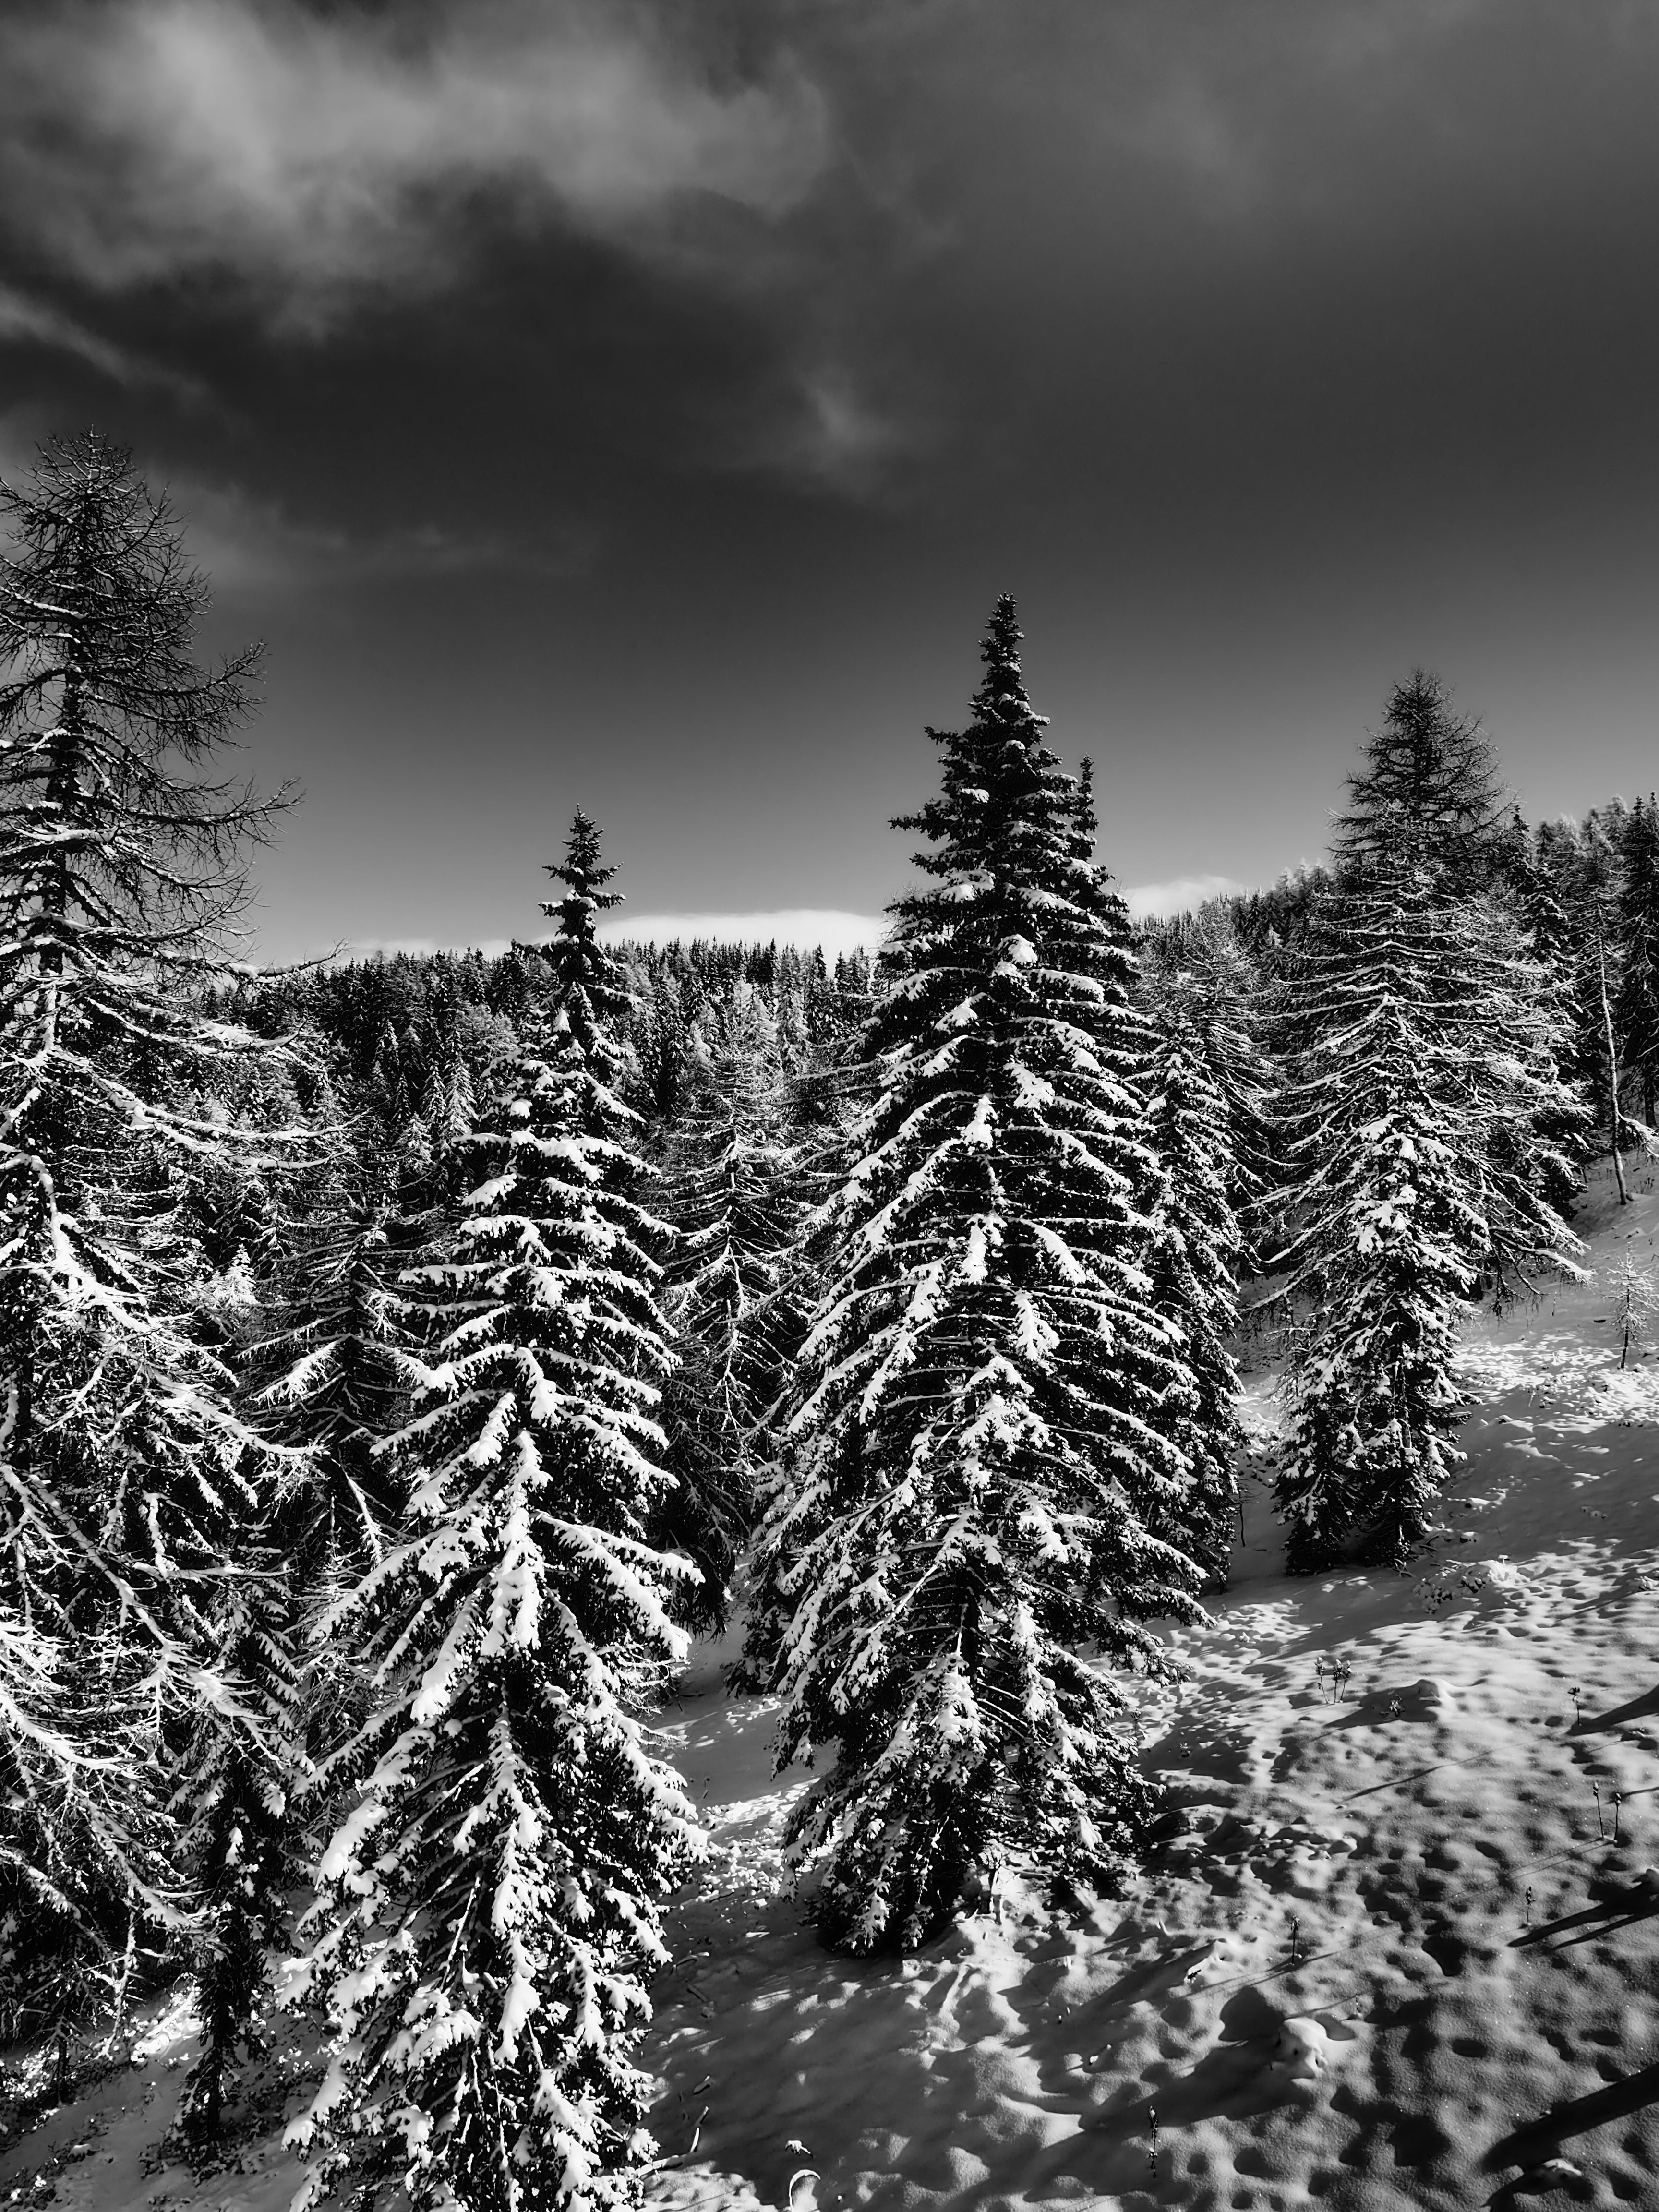 grayscale landscape scenery photo of snow covered pine trees